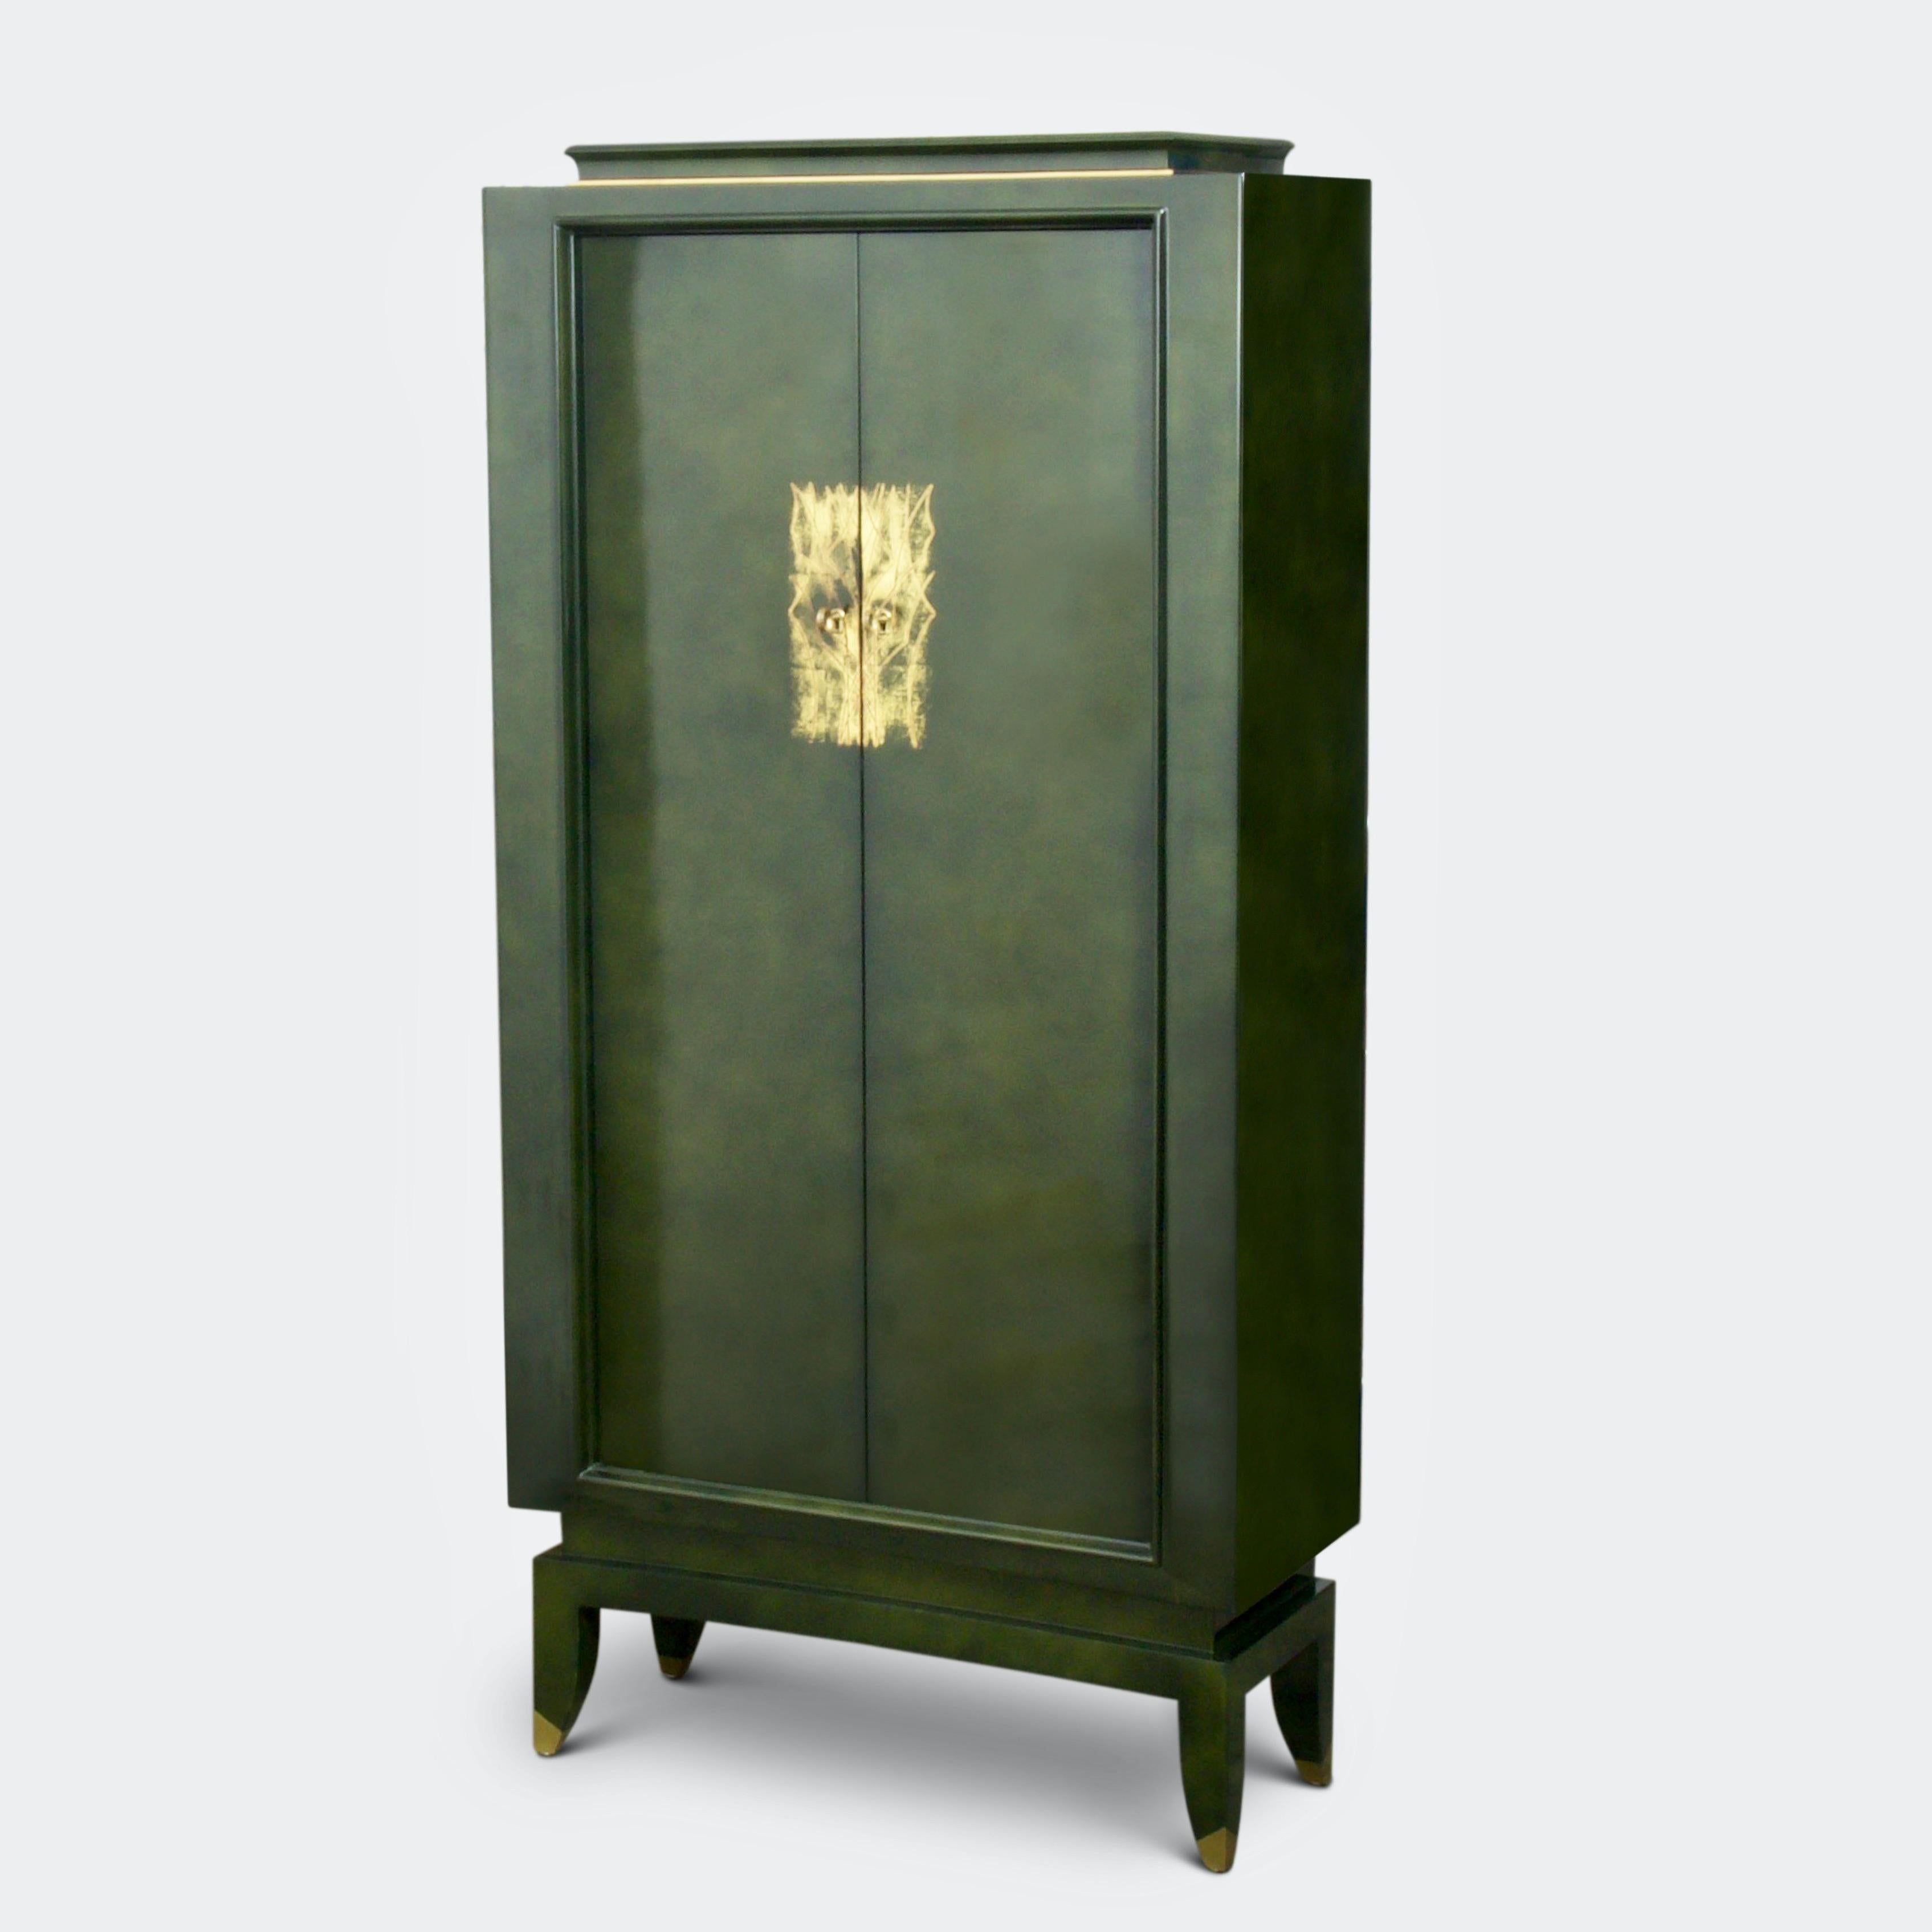 French Green Lacquer Cabinet by Andre Domin & Marcel Genevriere for Maison Dominique